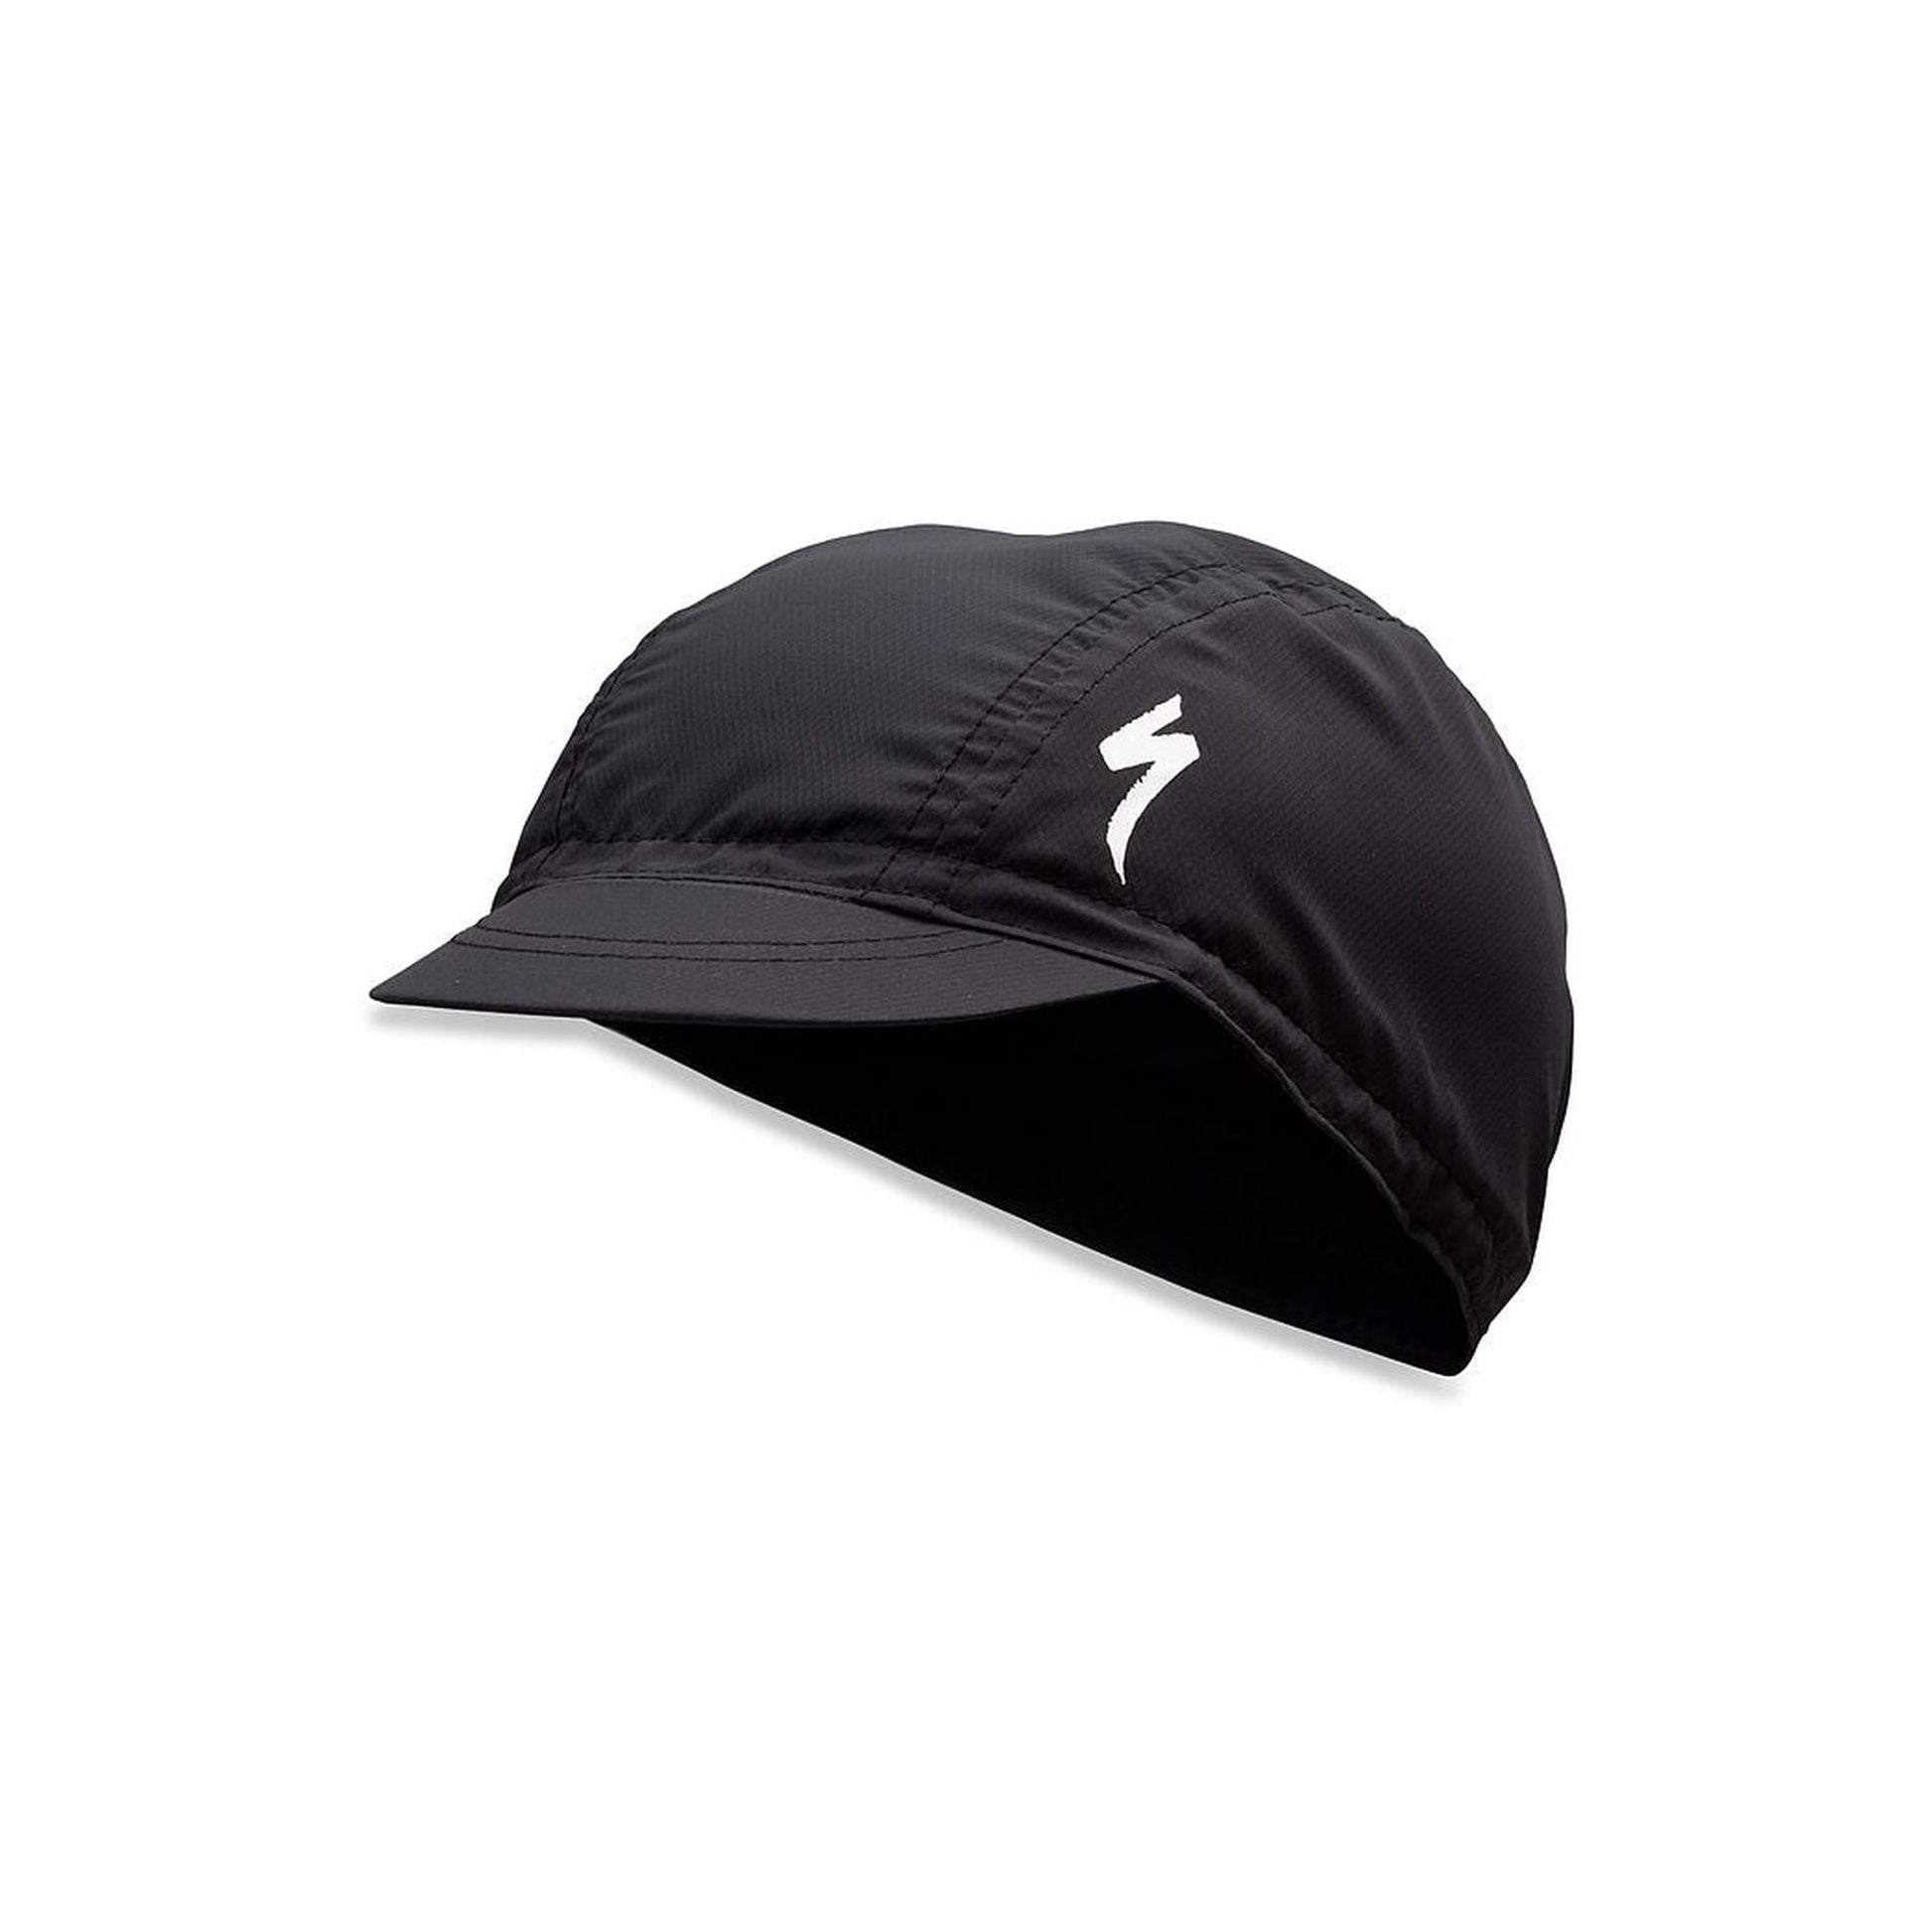 Deflectª UV Cycling Cap-Cycles Direct Specialized